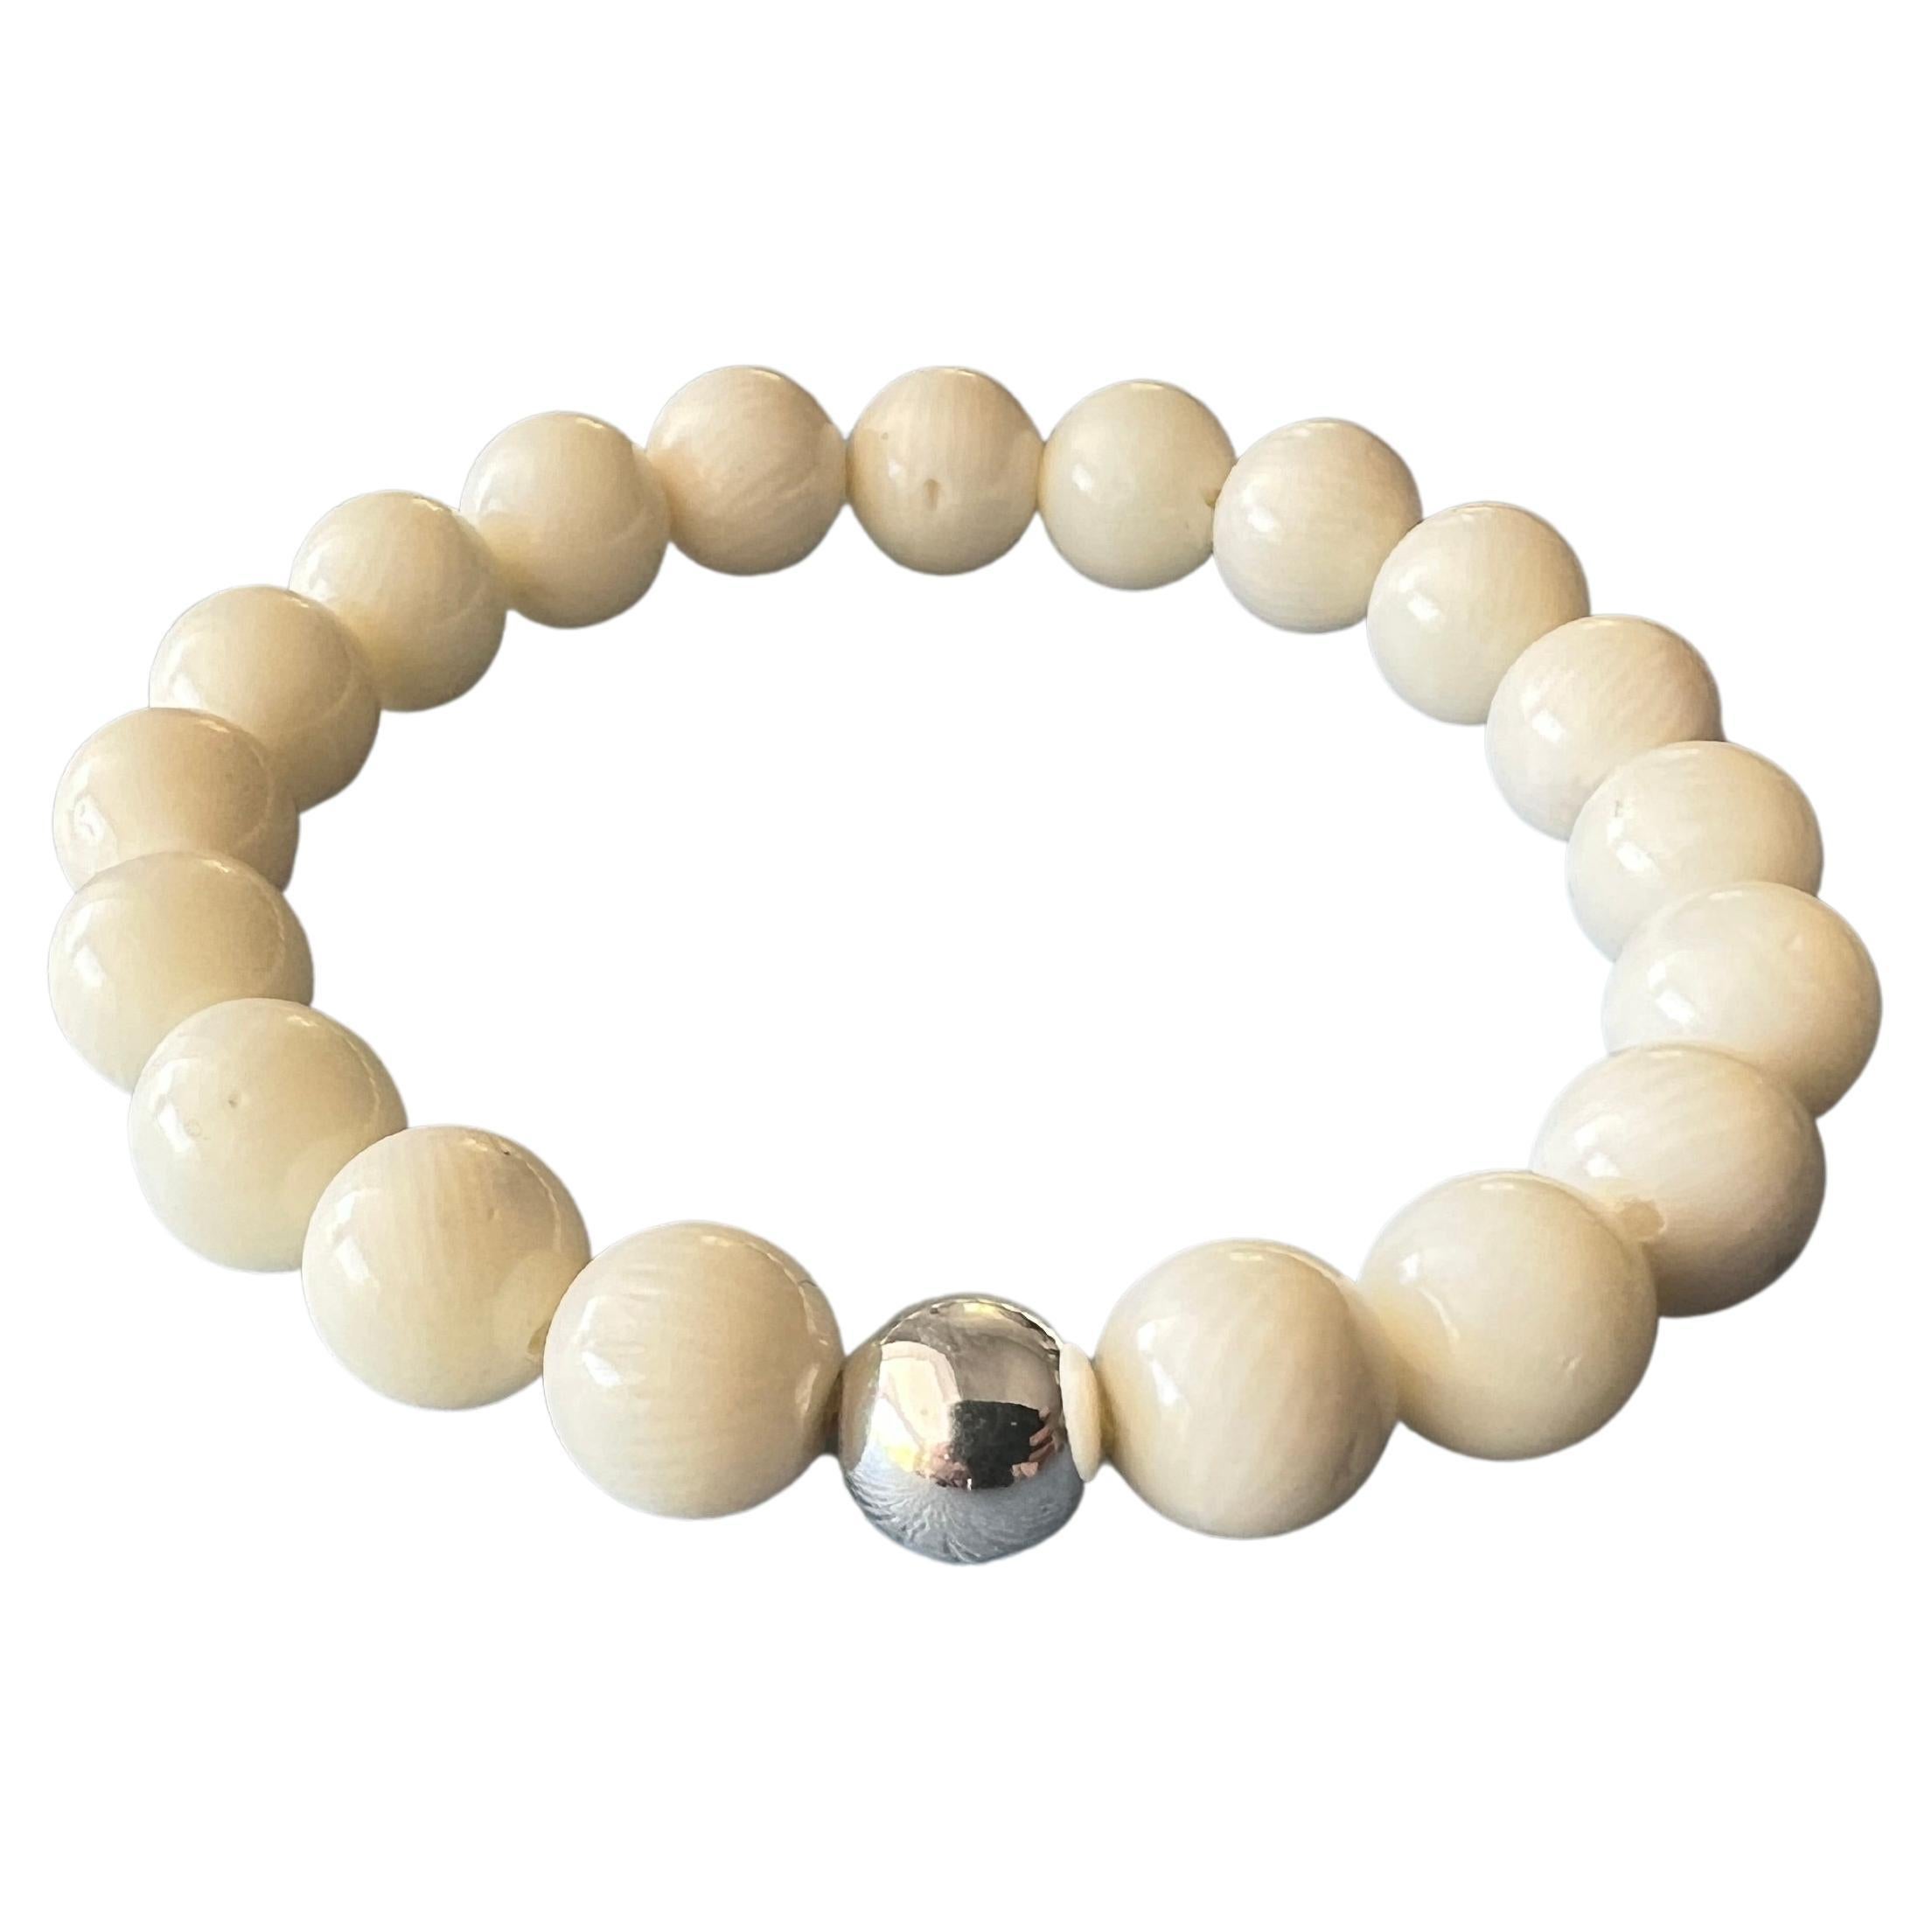 Cream White Bamboo Round Bead Bracelet Elastic Bracelet with Silver Bead 

Made in Los Angeles

Designer: J Dauphin

The Cream White Bamboo Round Bead Elastic Bracelet with Silver Bead offers a unique blend of natural beauty and metaphysical